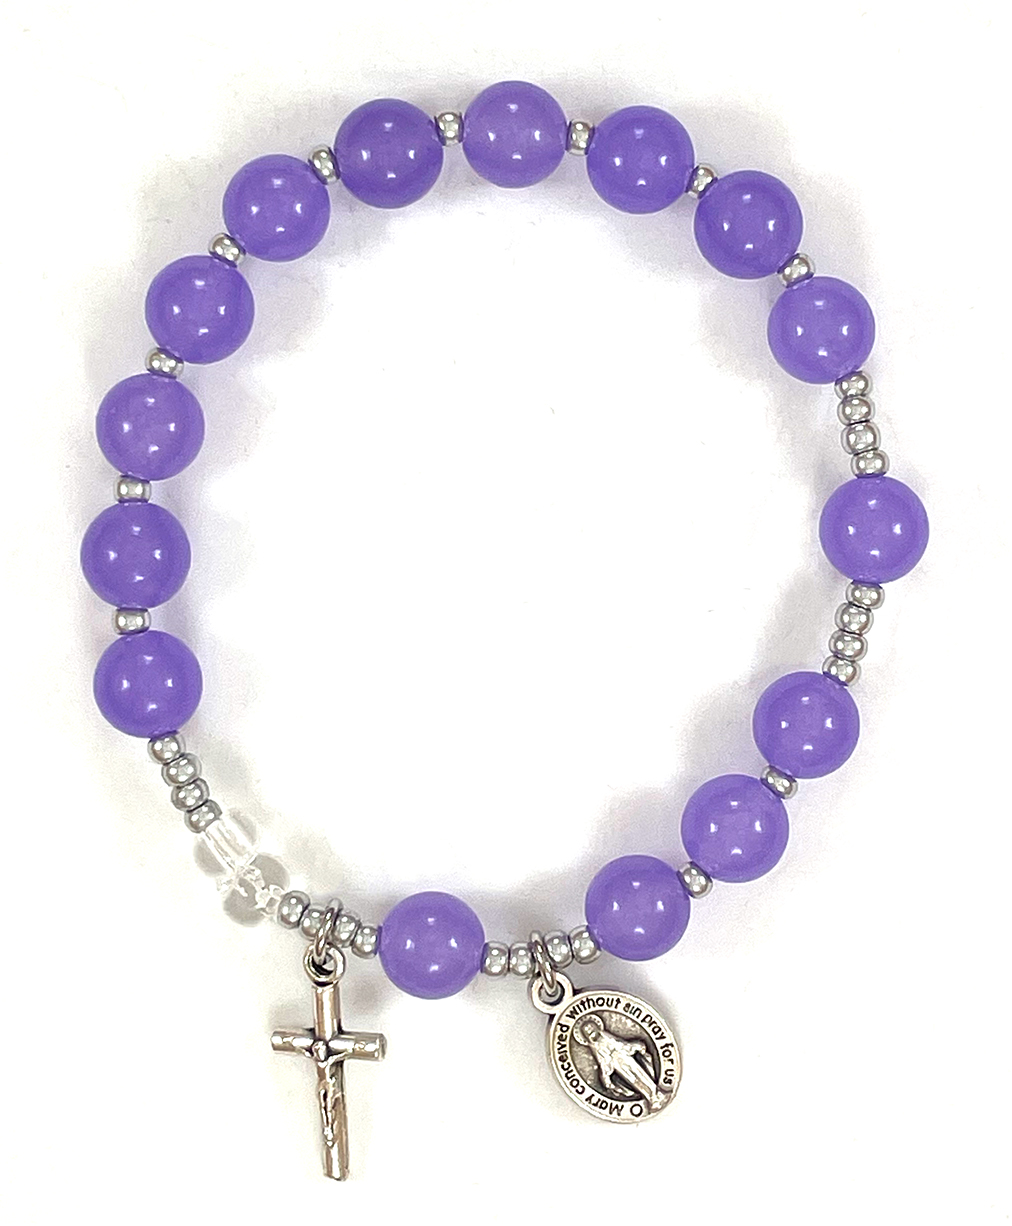 How to Care for Your Stretch Rosary Bracelet